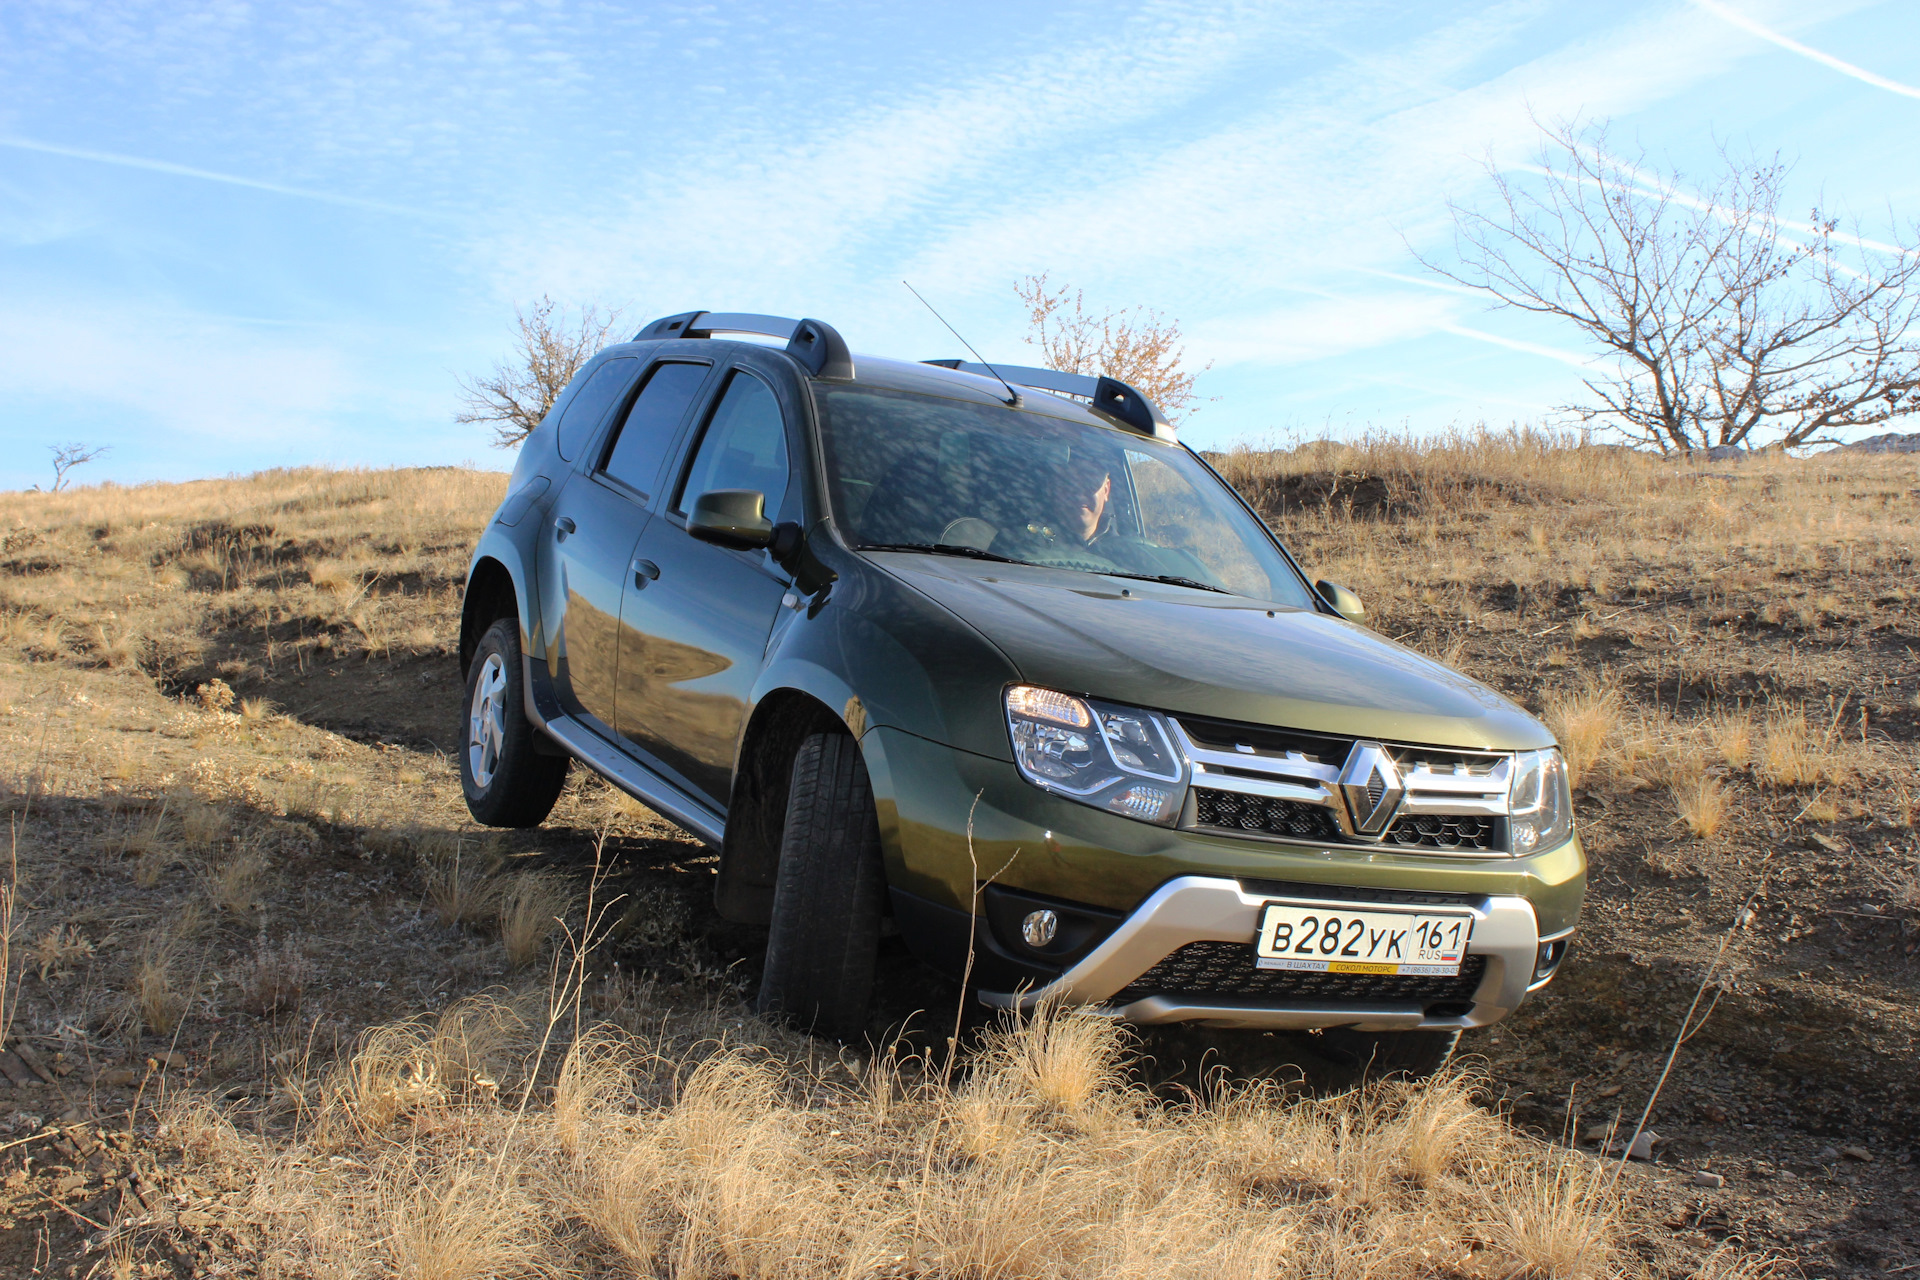 Дастер 4wd 2.0. Renault Duster 4. Рено Дастер 4х4. Дастер 2. Рено Дастер 2.0.